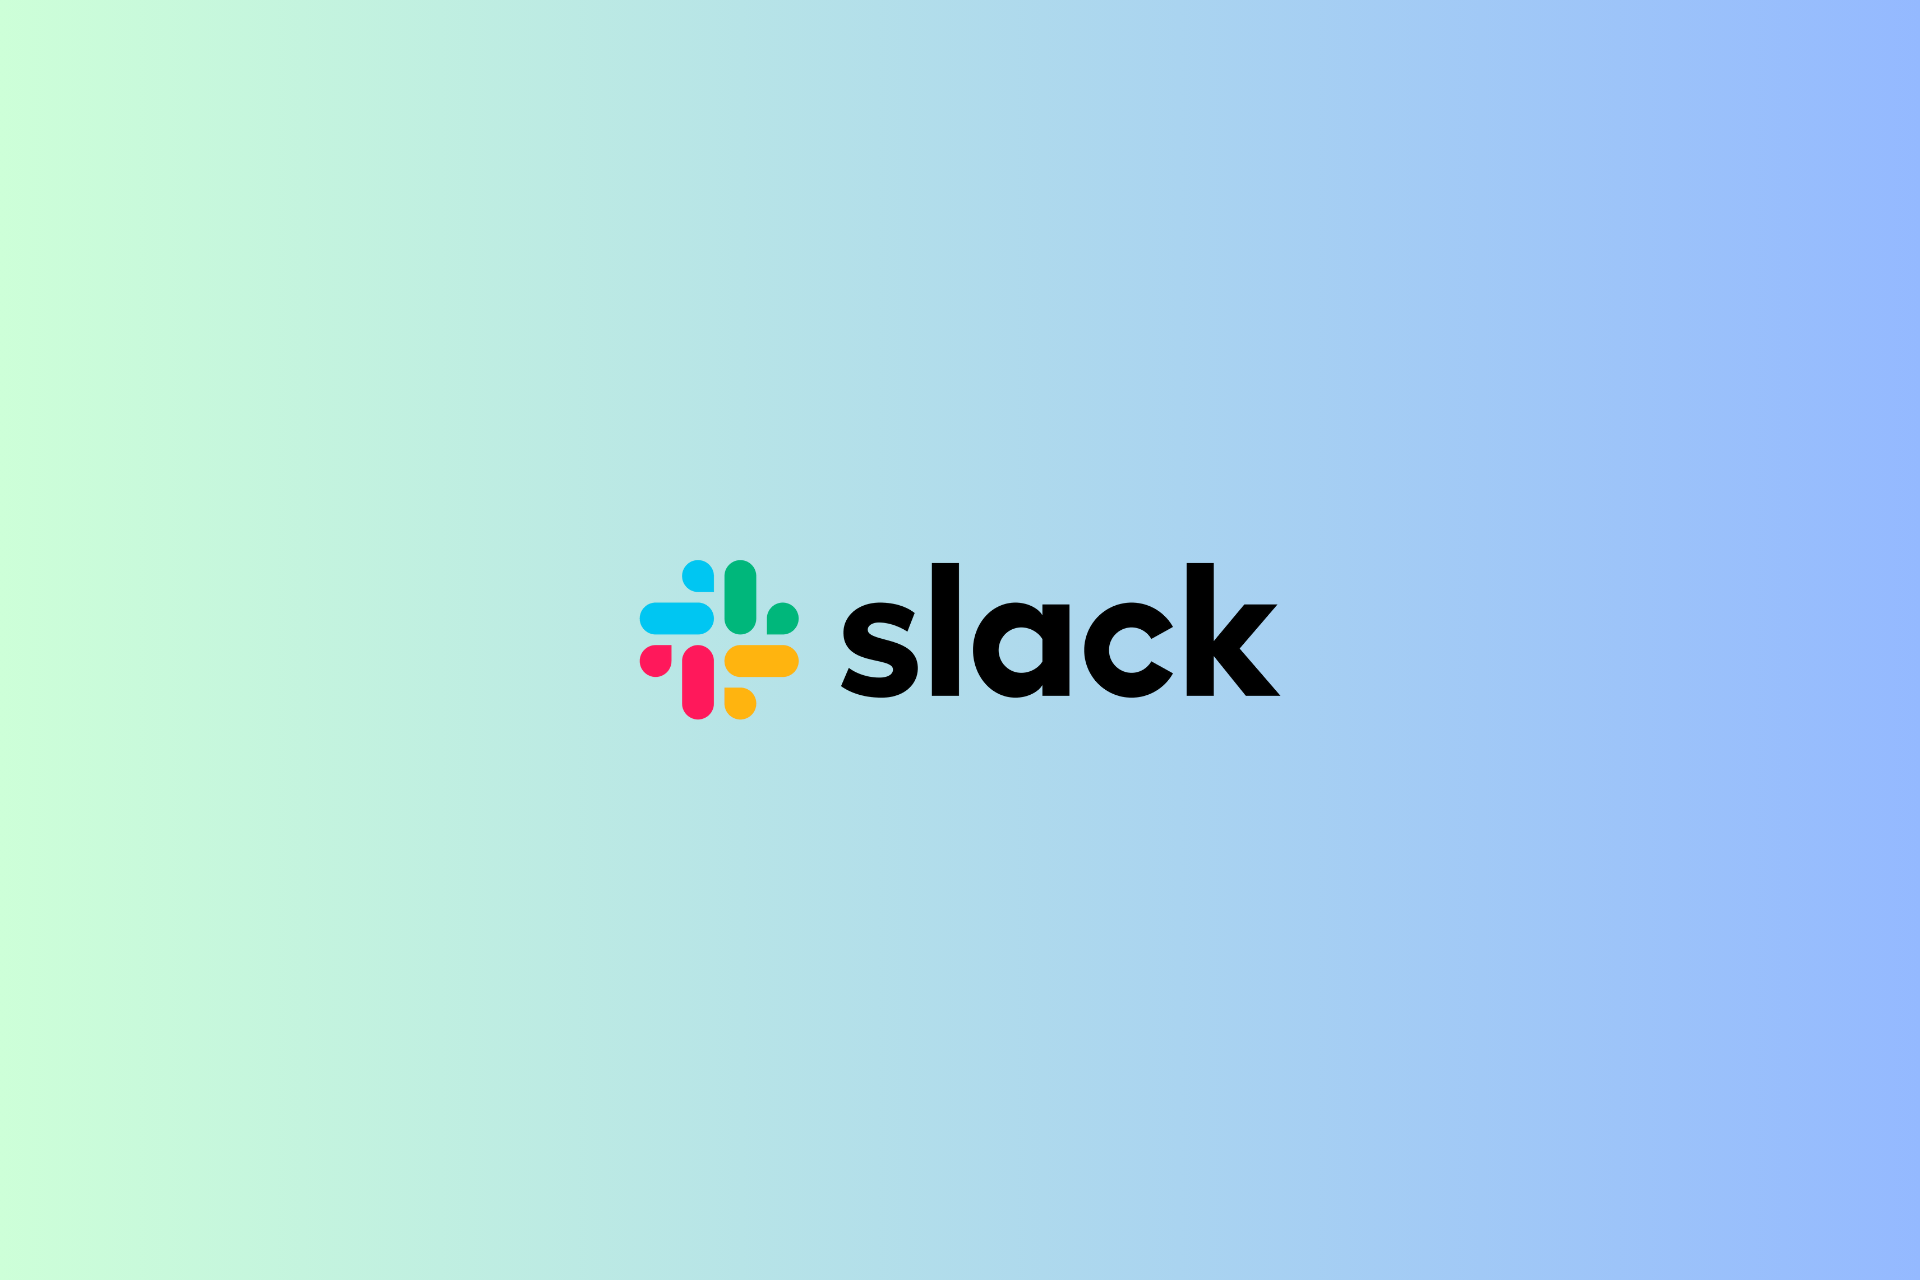 Slack denied using customer data to train its AI, but users remain skeptical